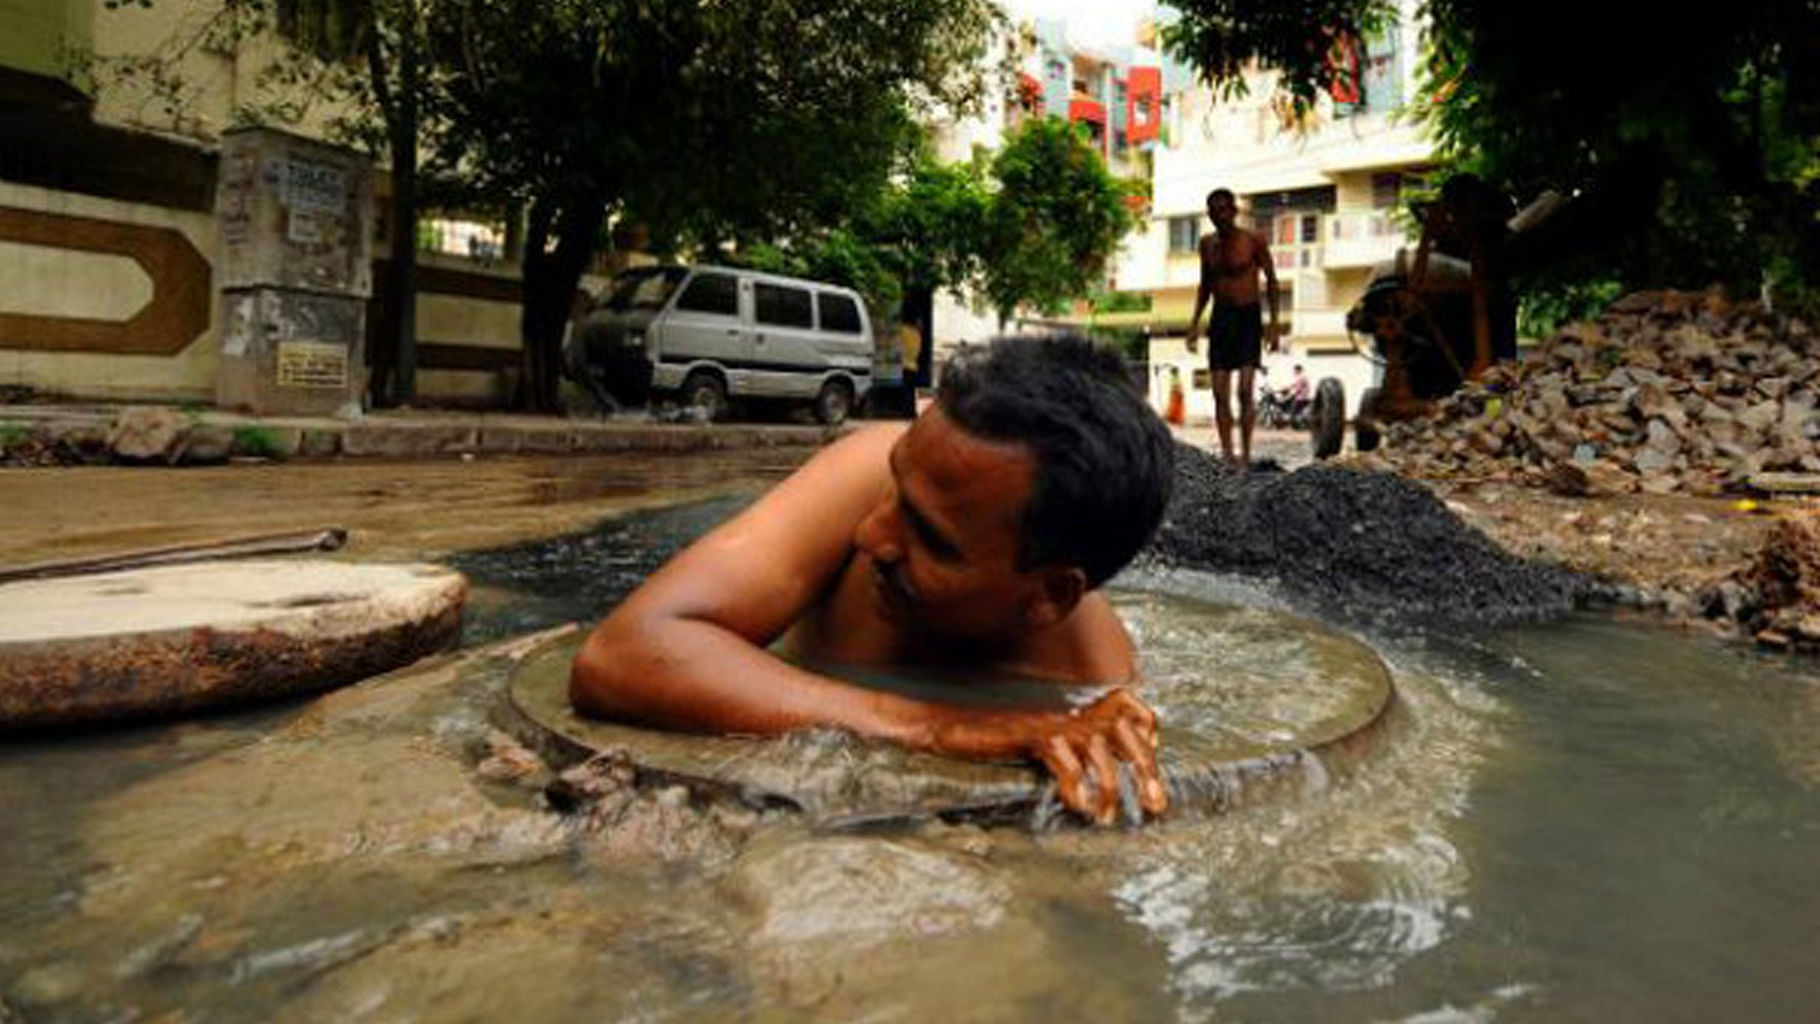 The Supreme Court expressed serious concern over people dying during manual scavenging and sewage-cleaning in India. 